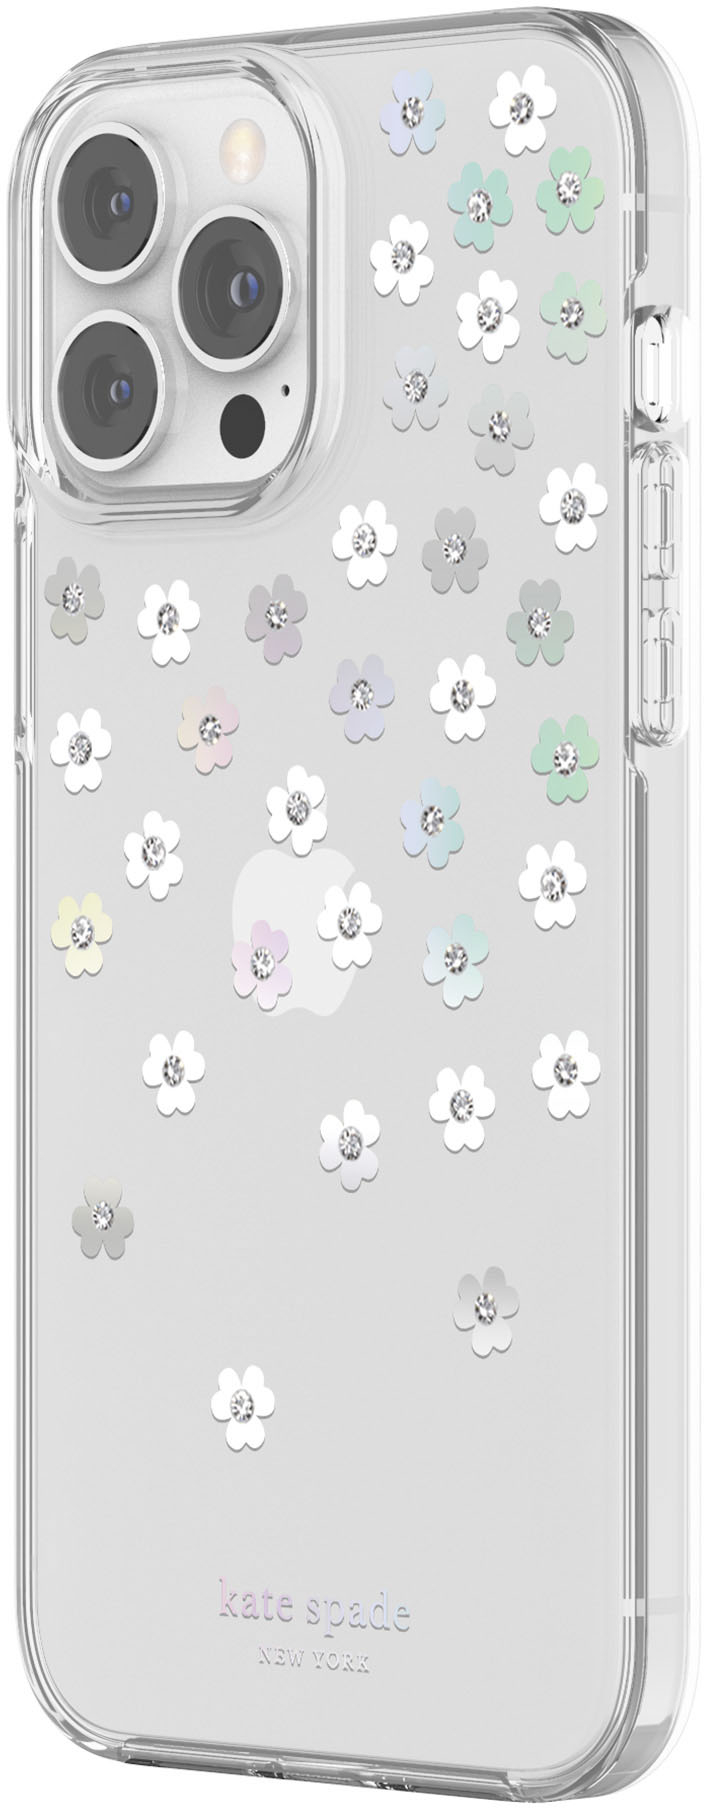 kate spade new york Protective Hardshell Case for iPhone 13/12 Pro Max  Scatterred Flowers KSIPH-189-SFIRC - Best Buy